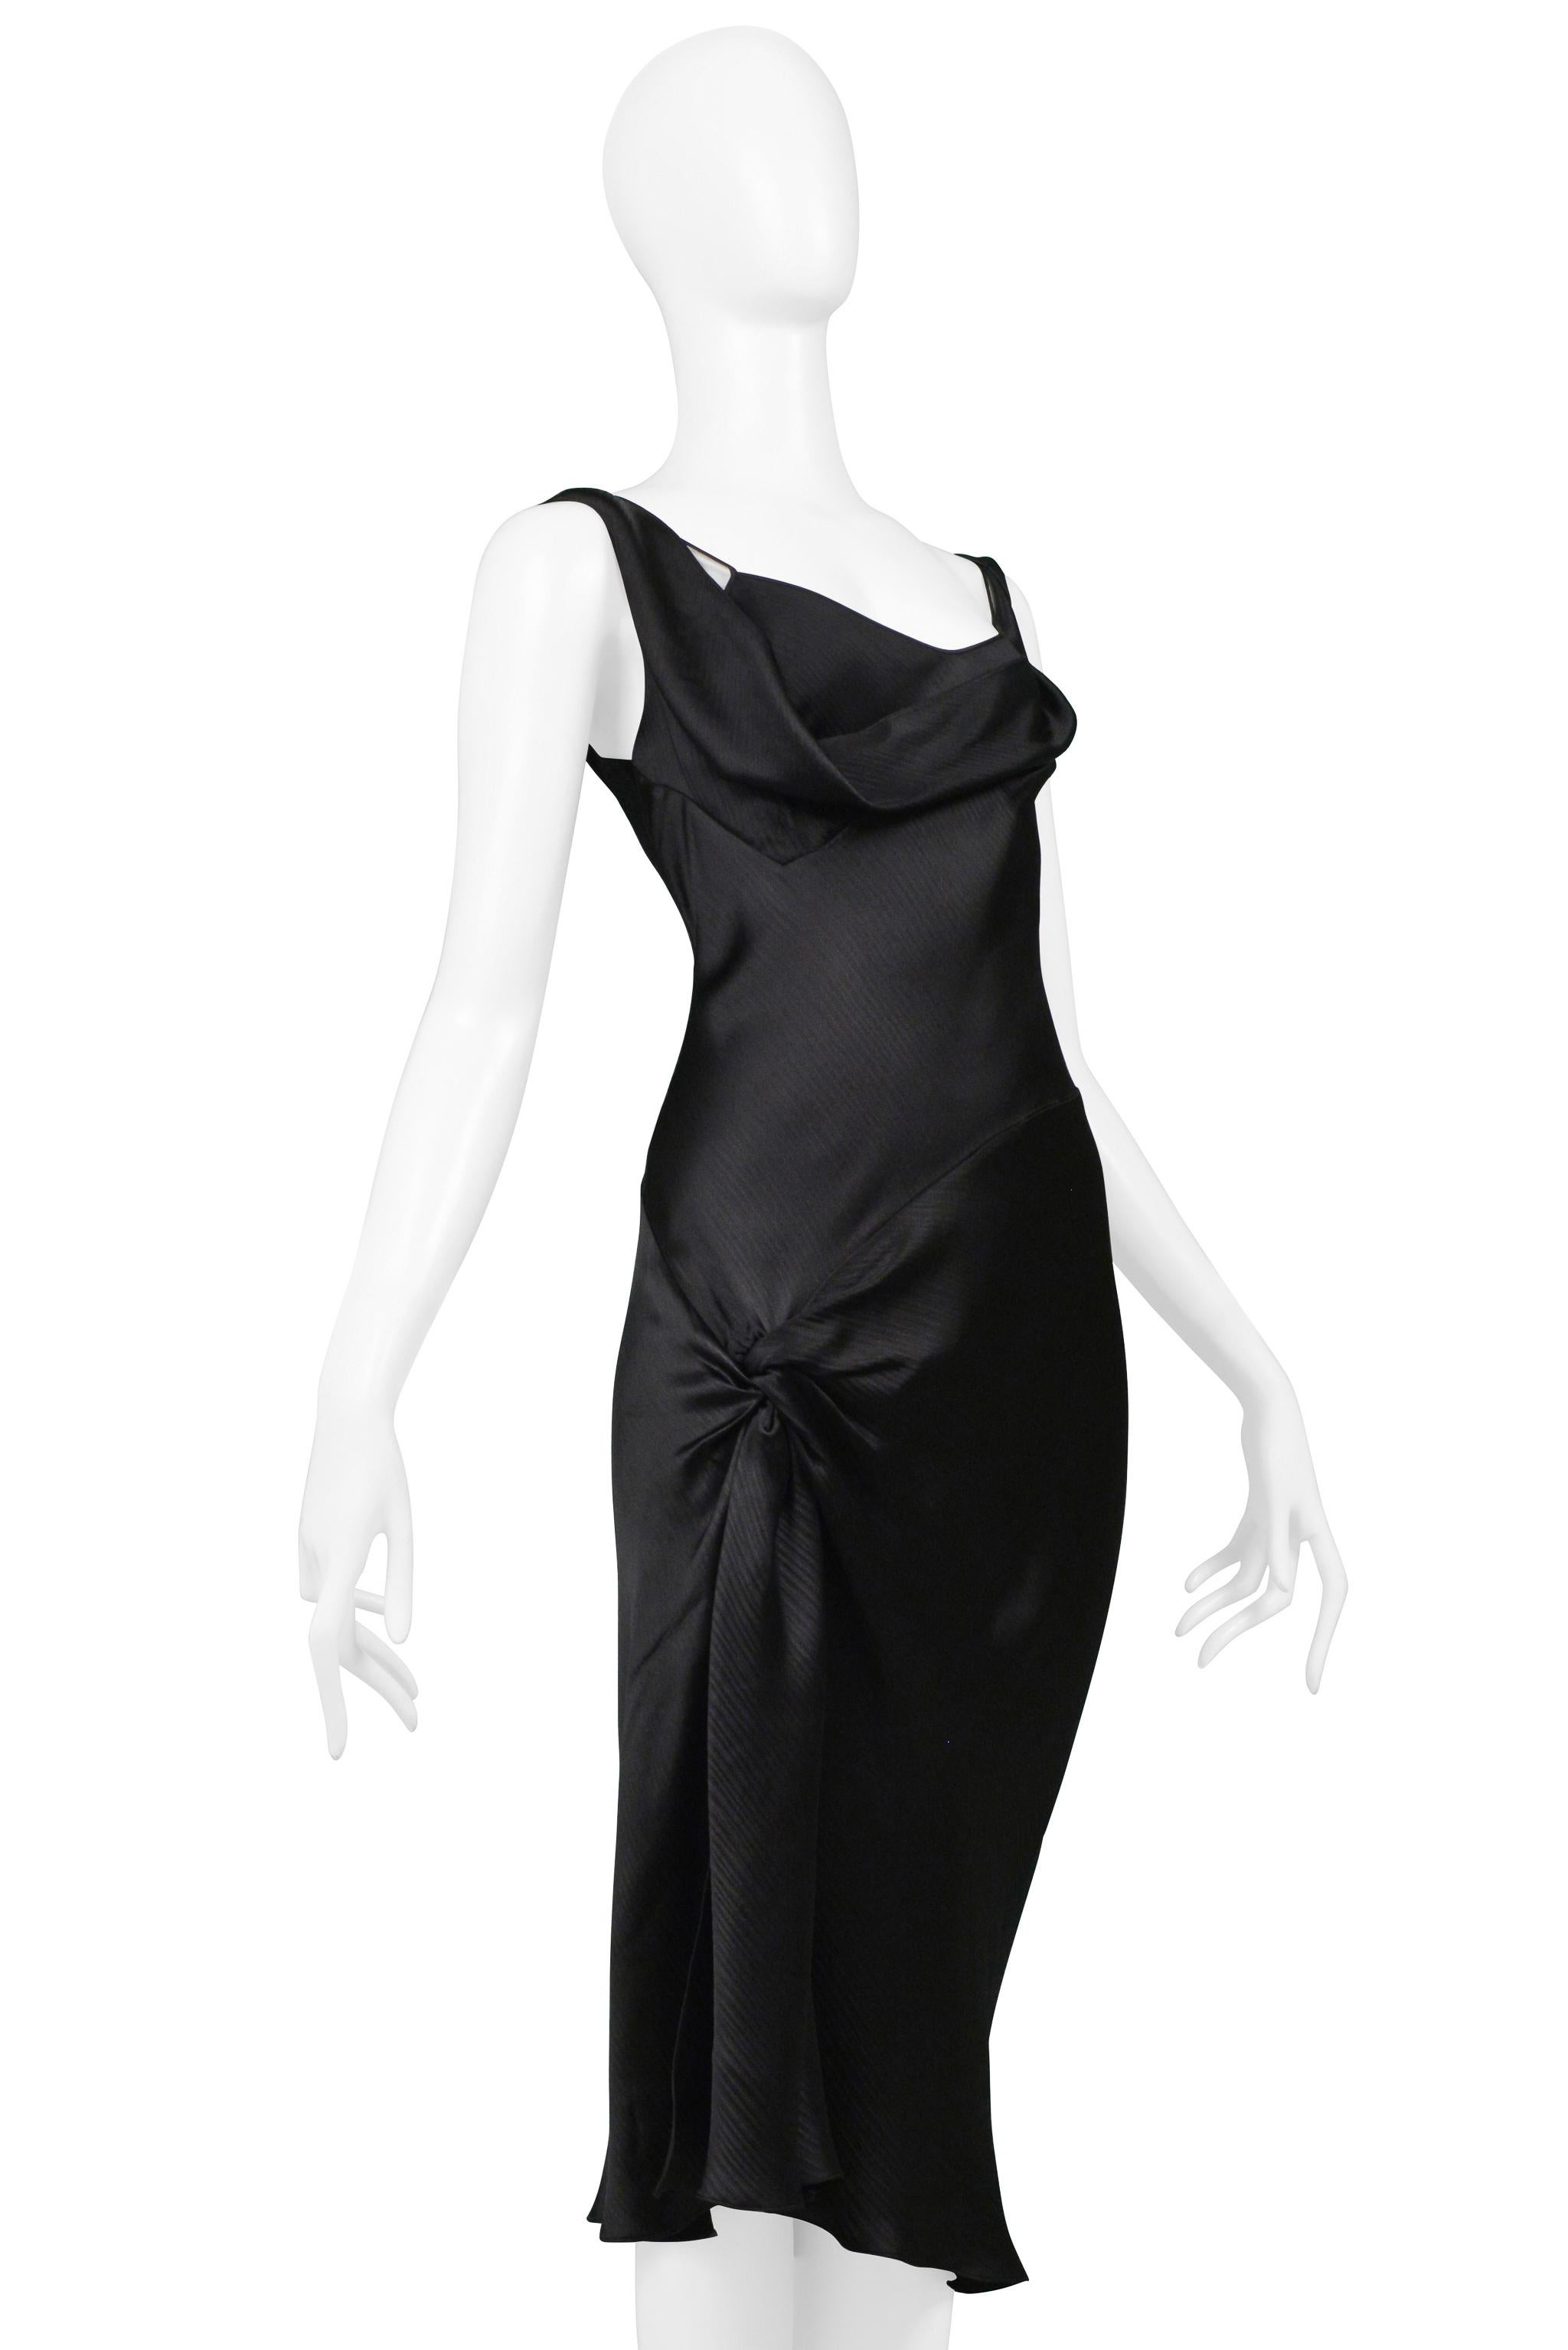 Stunning John Galliano Black Satin Slip Dress with Hip Knot and Slit 1990s For Sale 1